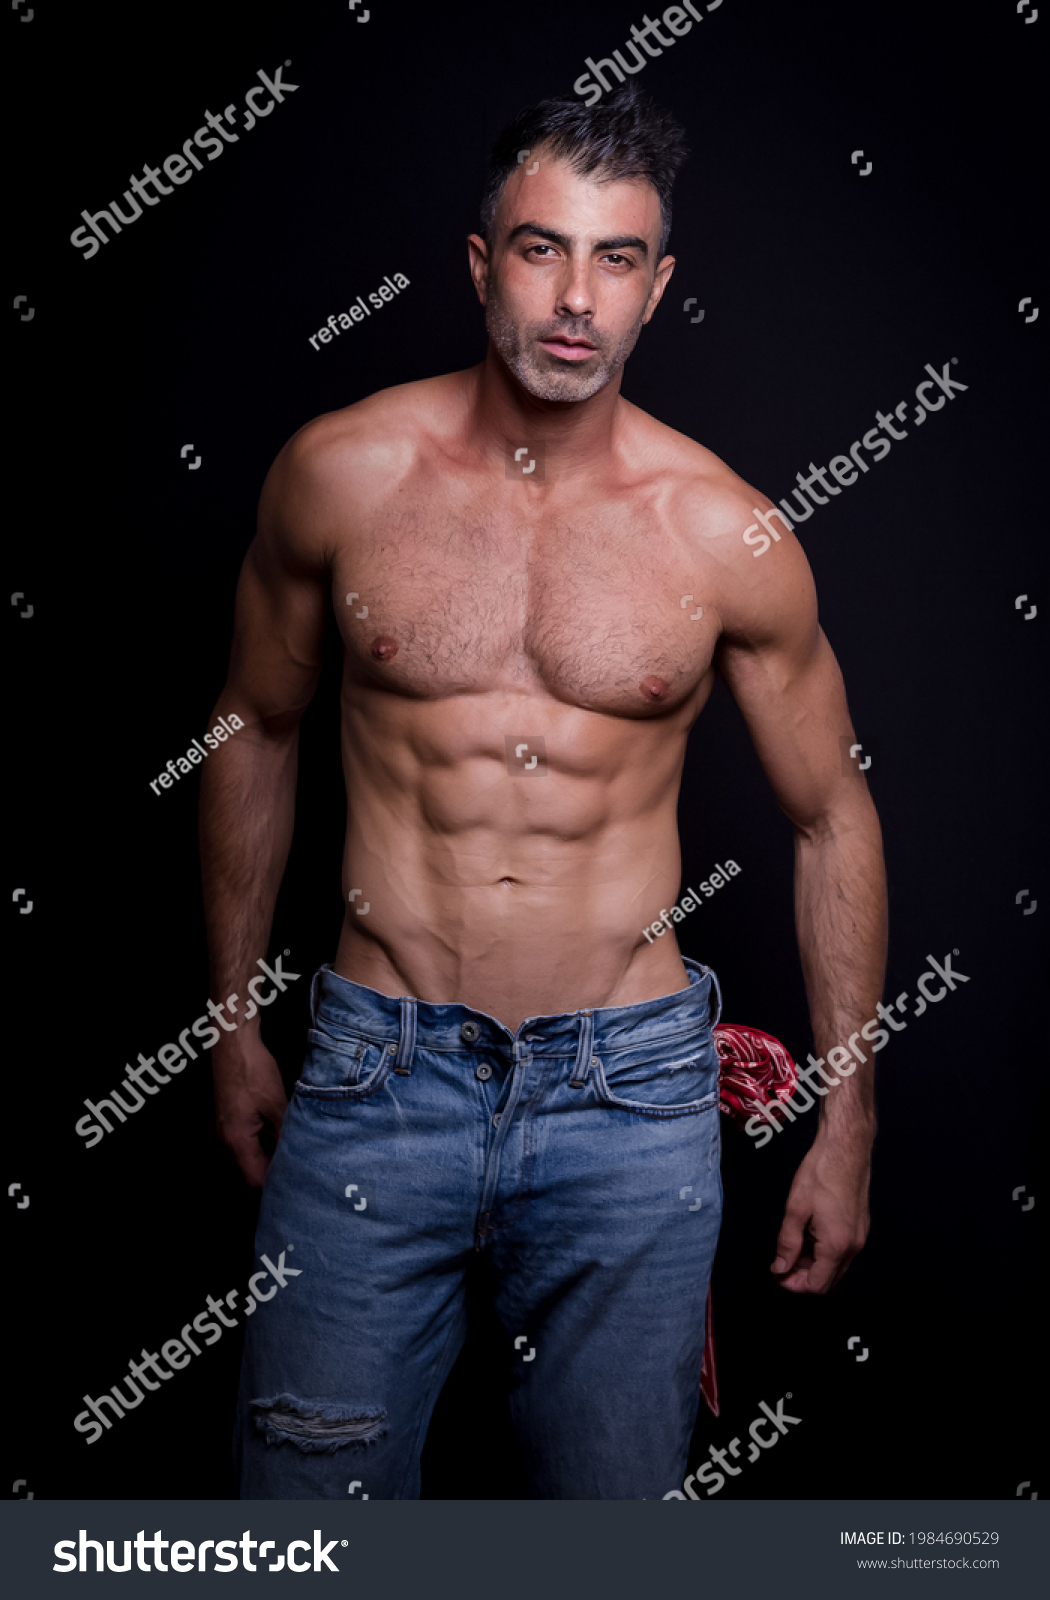 Shirtless Male Muscular Handsome Beefcake Jeans Jock Abs Hot Guy PHOTO 4X6 G1865